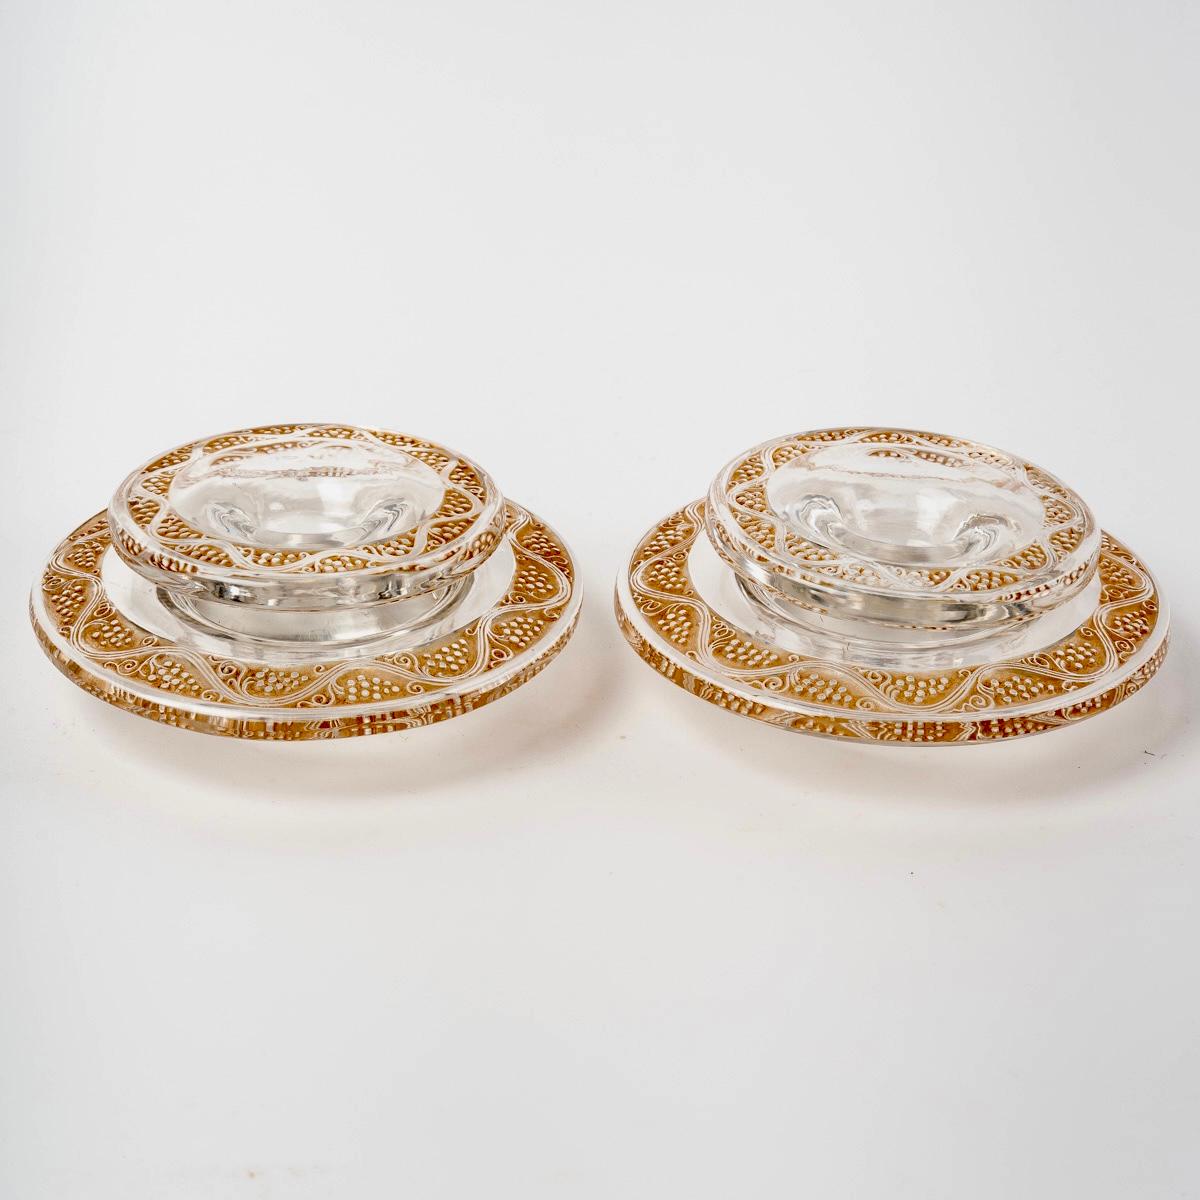 Molded René Lalique - Pair of Candlesticks and Bowl Ricquewihr Glass with Sepia Patina For Sale